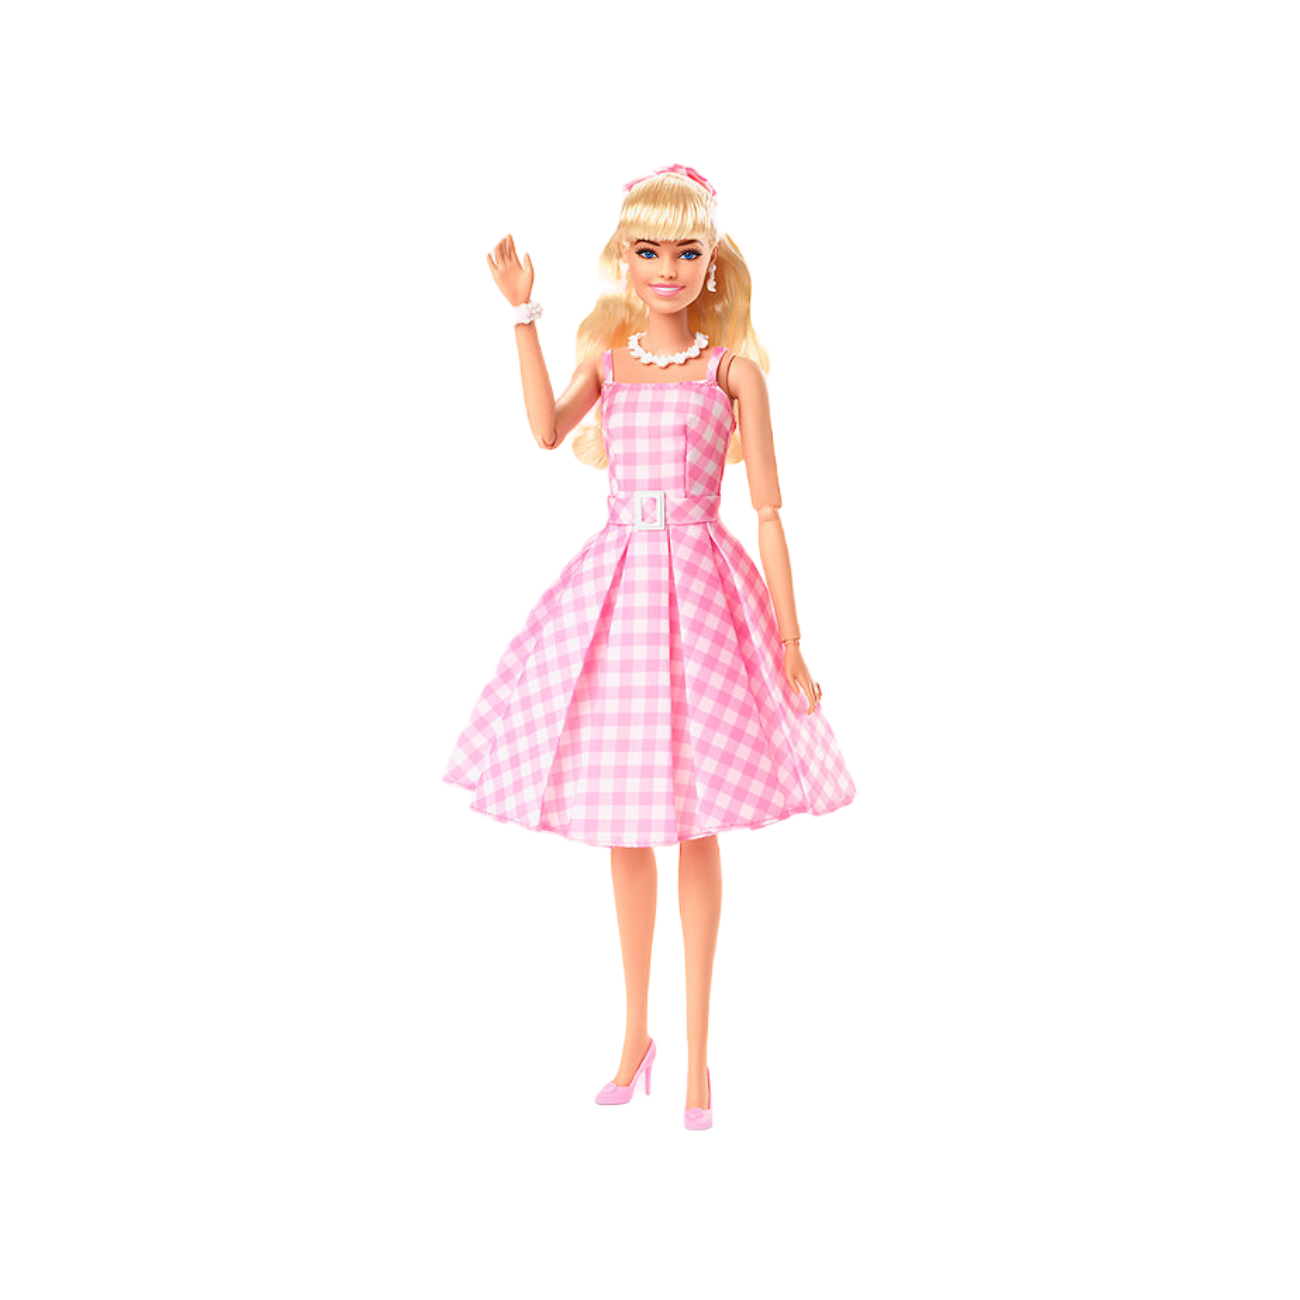 Barbie the movie Barbie doll waving in a pink and white gingham dress